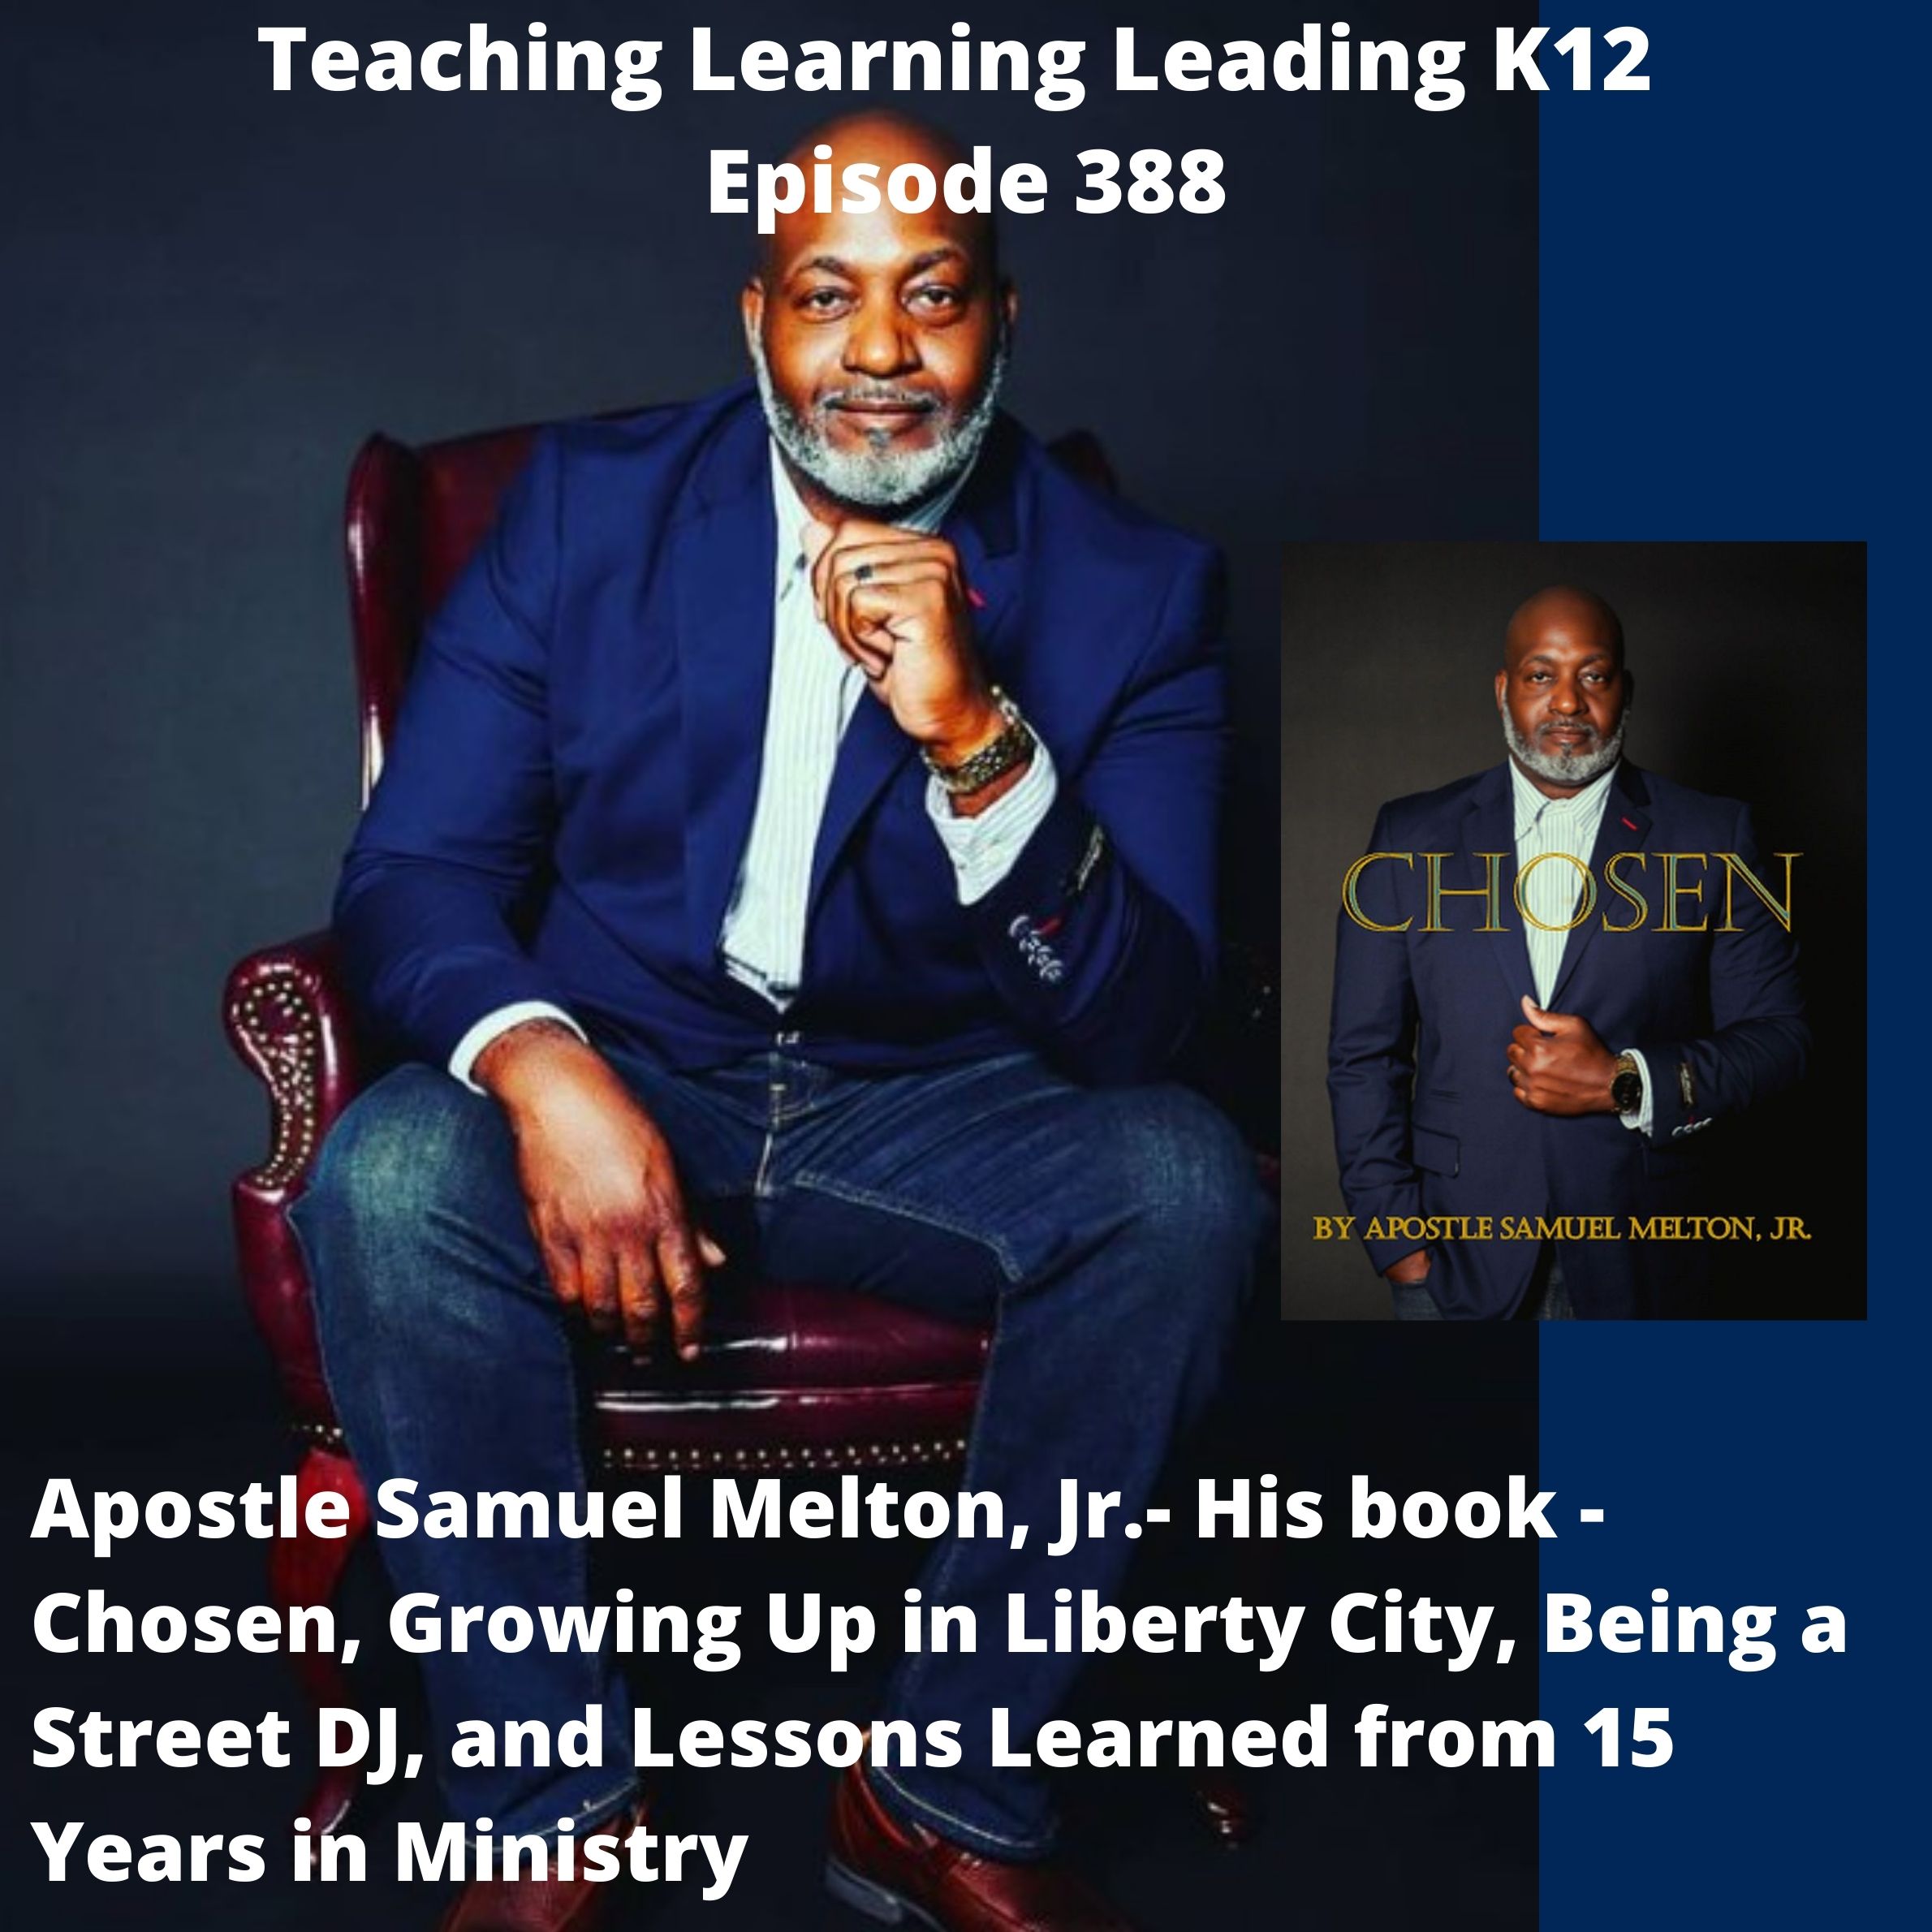 Samuel Melton, Jr: His book - Chosen, Growing up in Liberty City, Being a Street DJ, and Learned Lessons from 15 Years in the Ministry - 388 Image